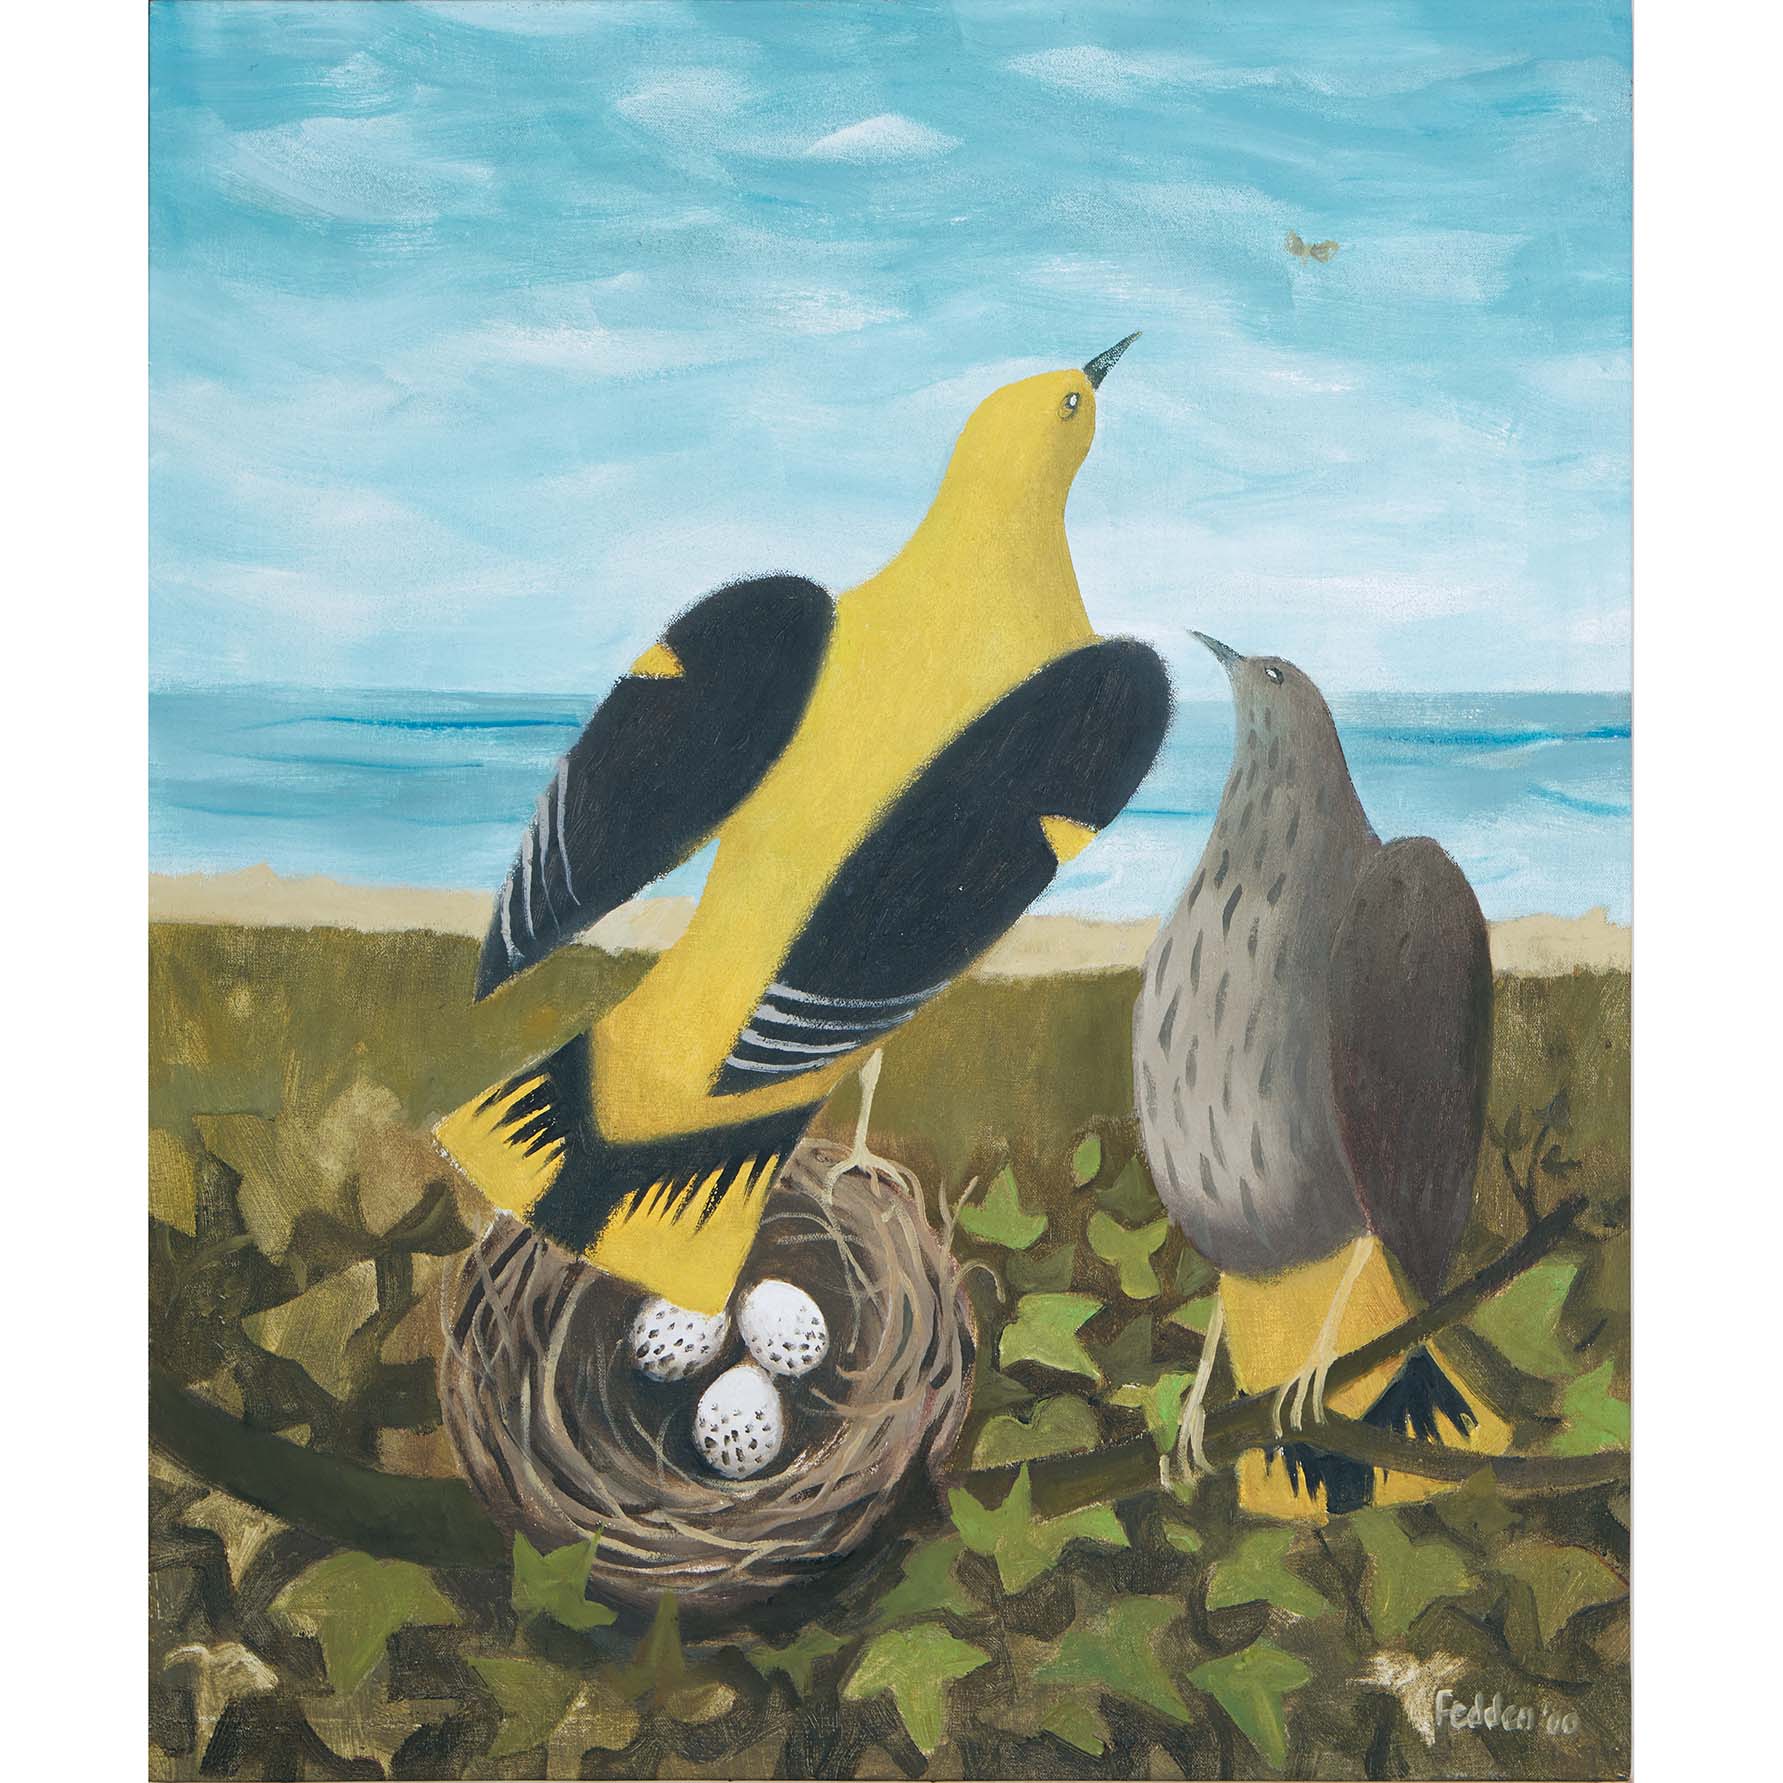 MARY FEDDEN. GOLDEN ORIOLES. 2000. SOLD